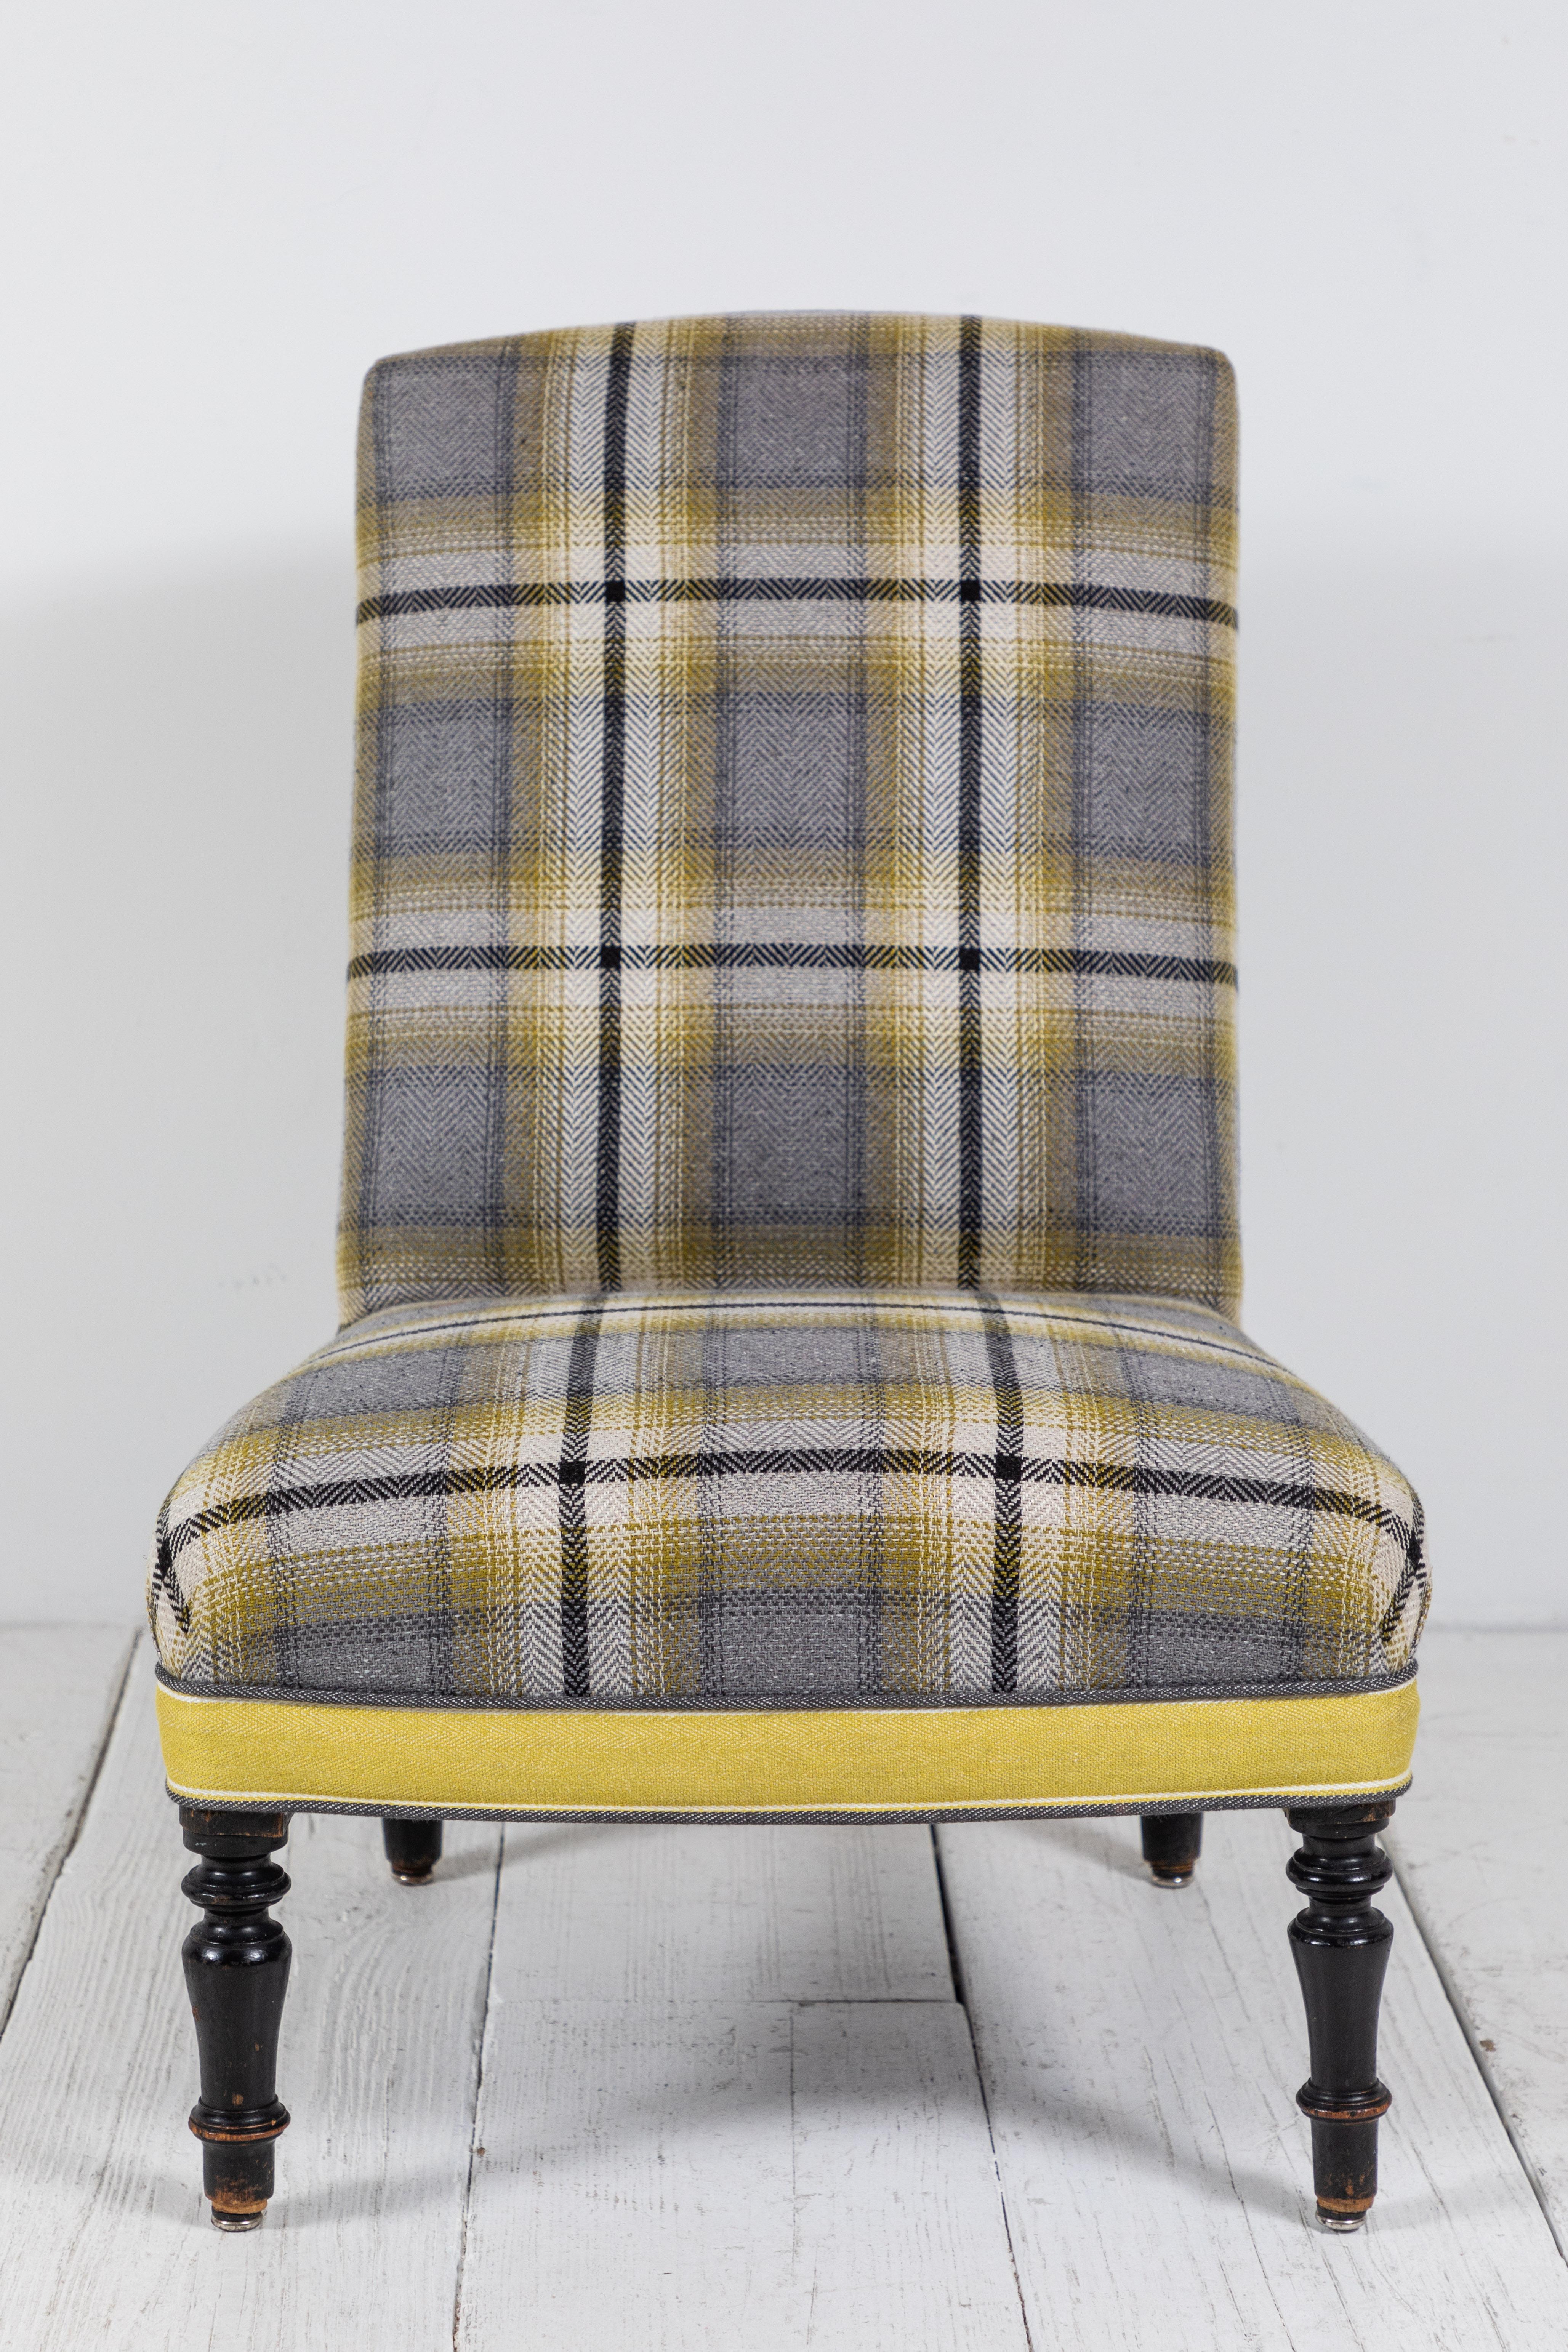 20th Century Pair of French Slipper Chairs in Yellow and Grey Plaid